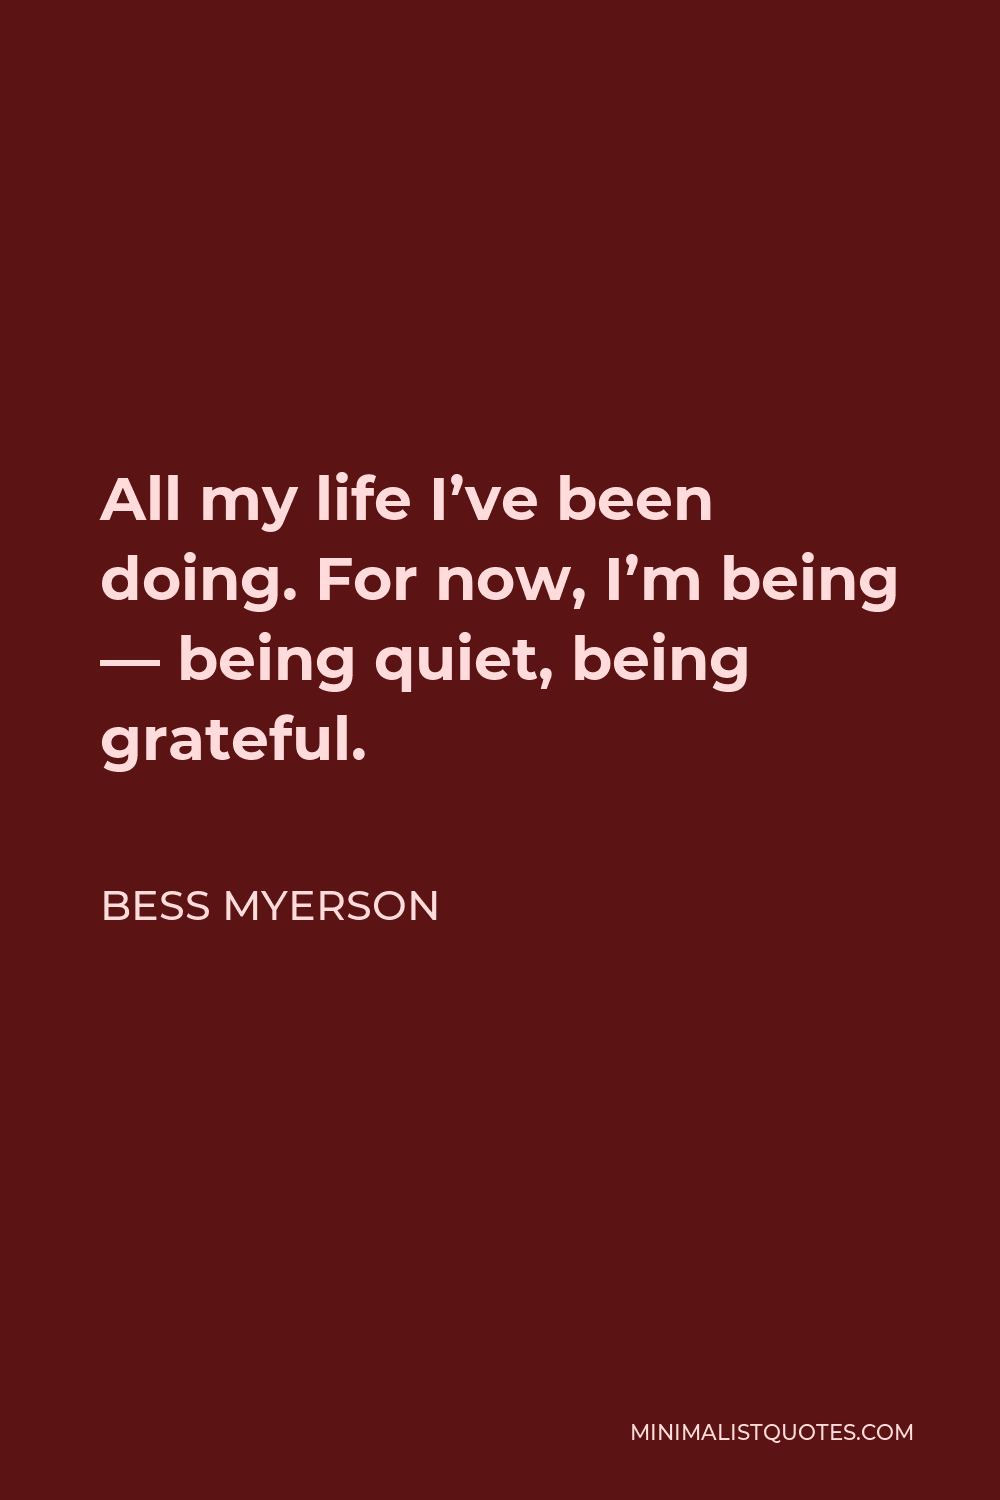 Bess Myerson Quote - All my life I’ve been doing. For now, I’m being — being quiet, being grateful.